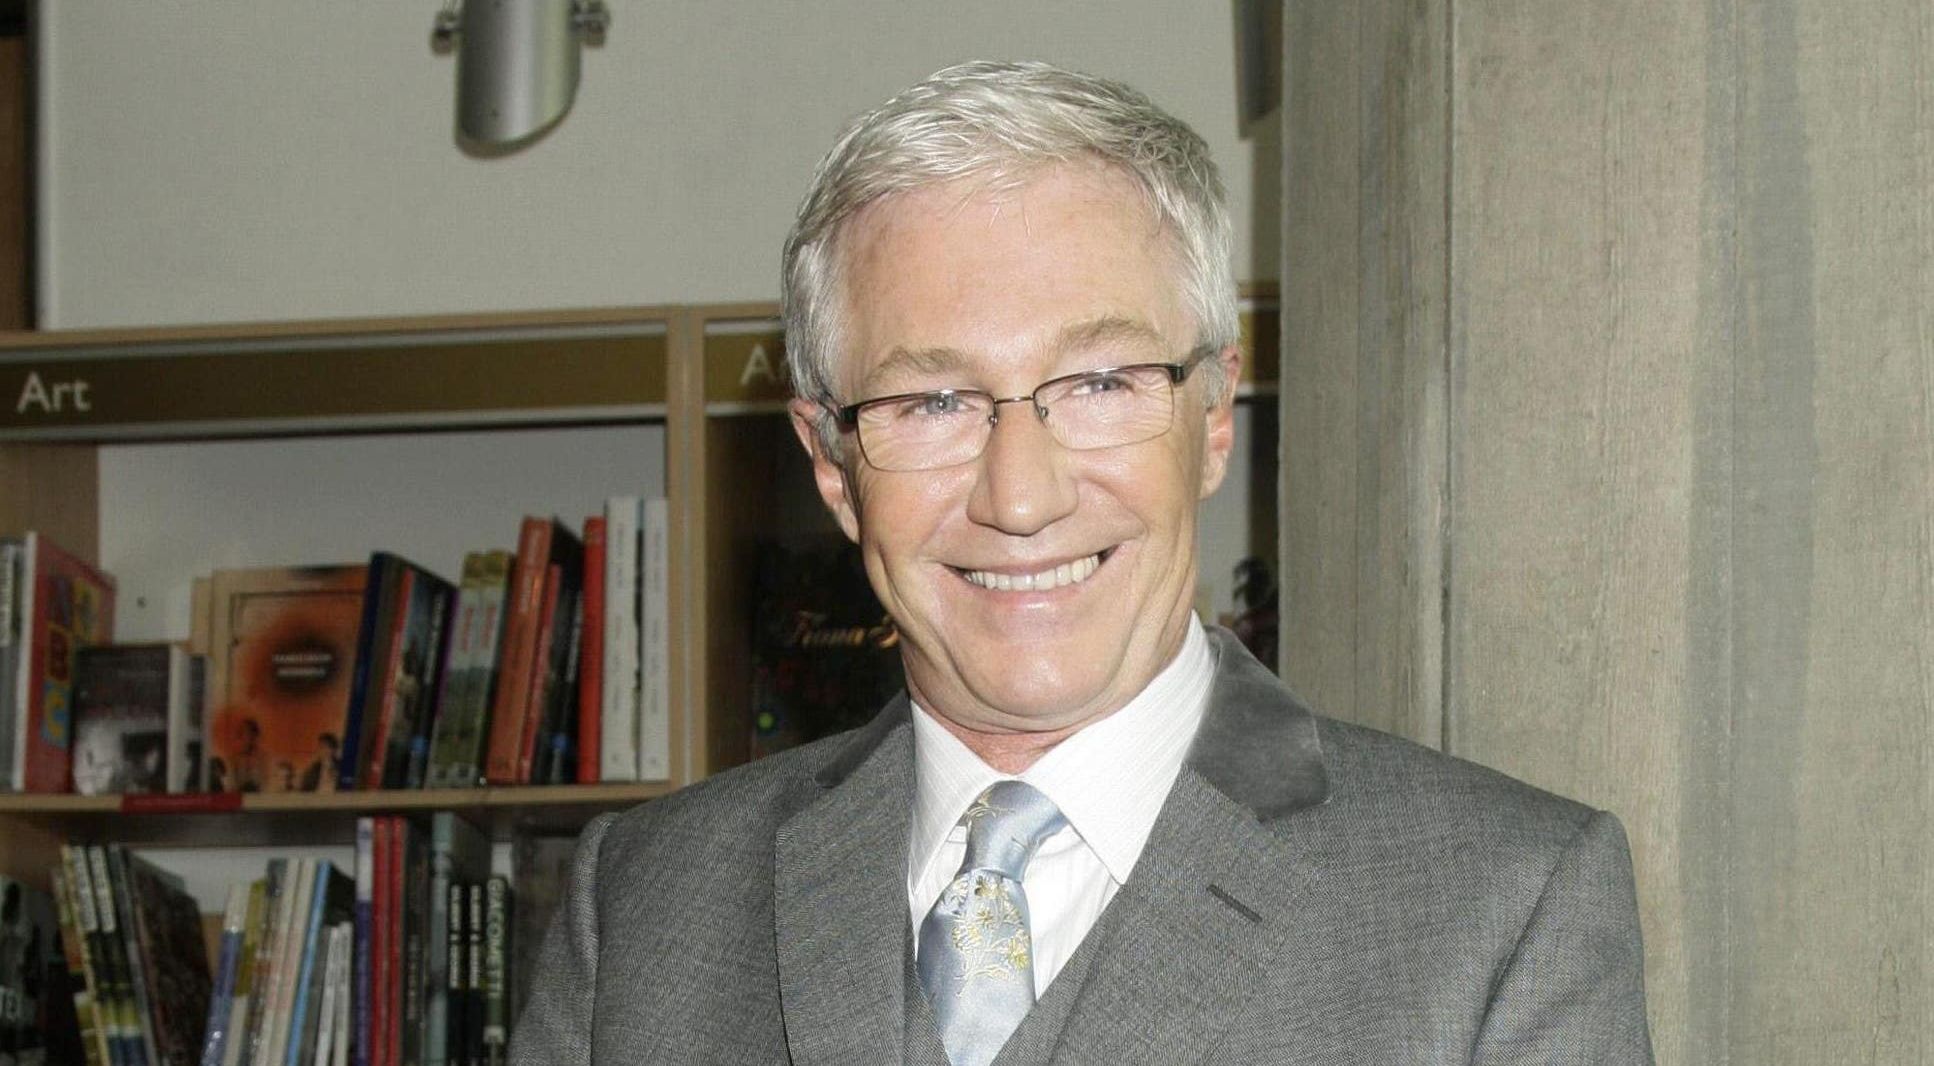 Paul O’Grady statements he can smell ghostly fragrance in his dwelling